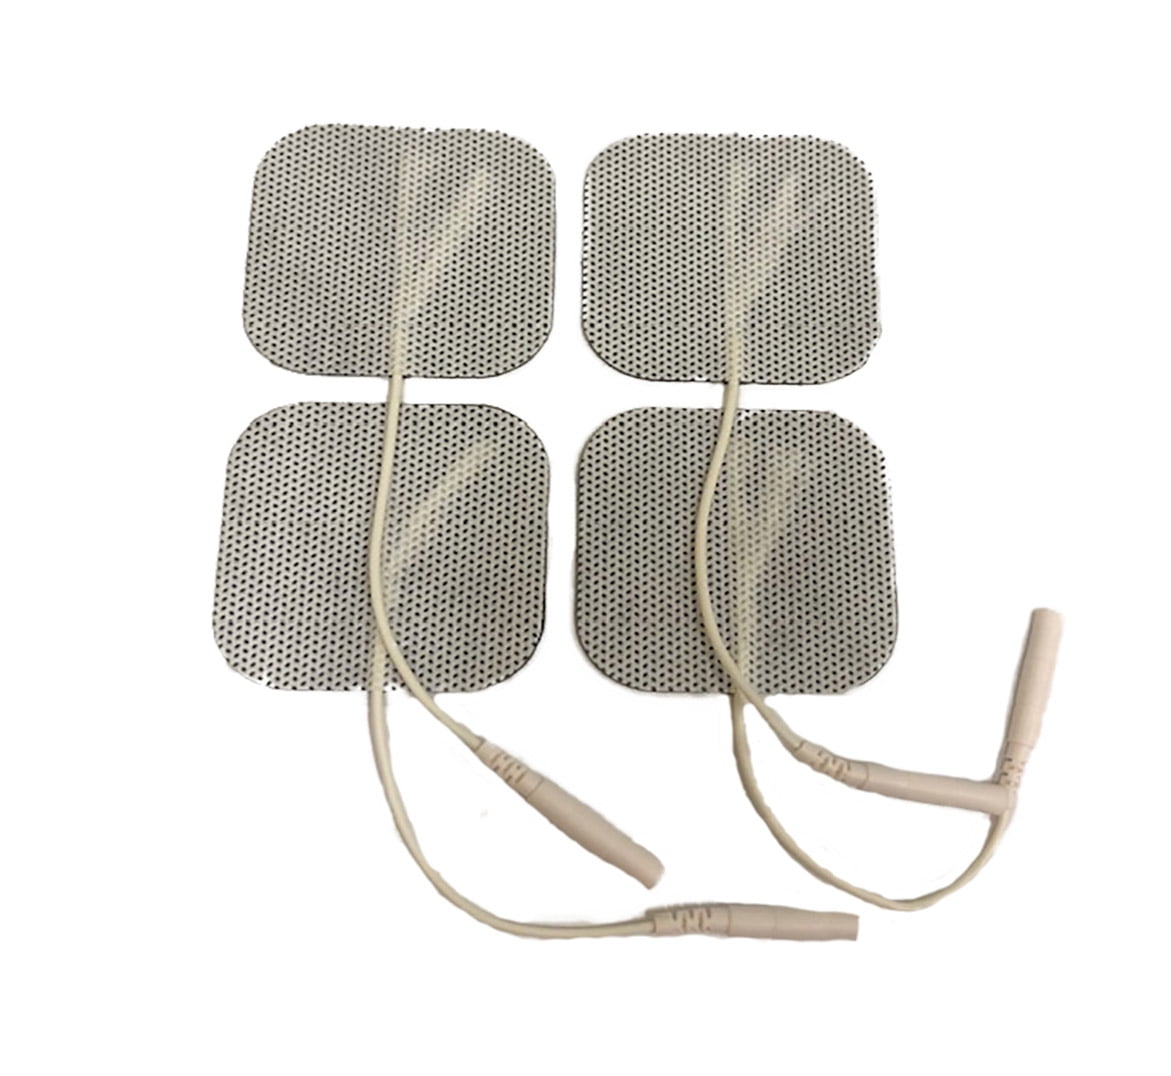 24pcs TENS Unit Replacement Pads For Tenker AS1080